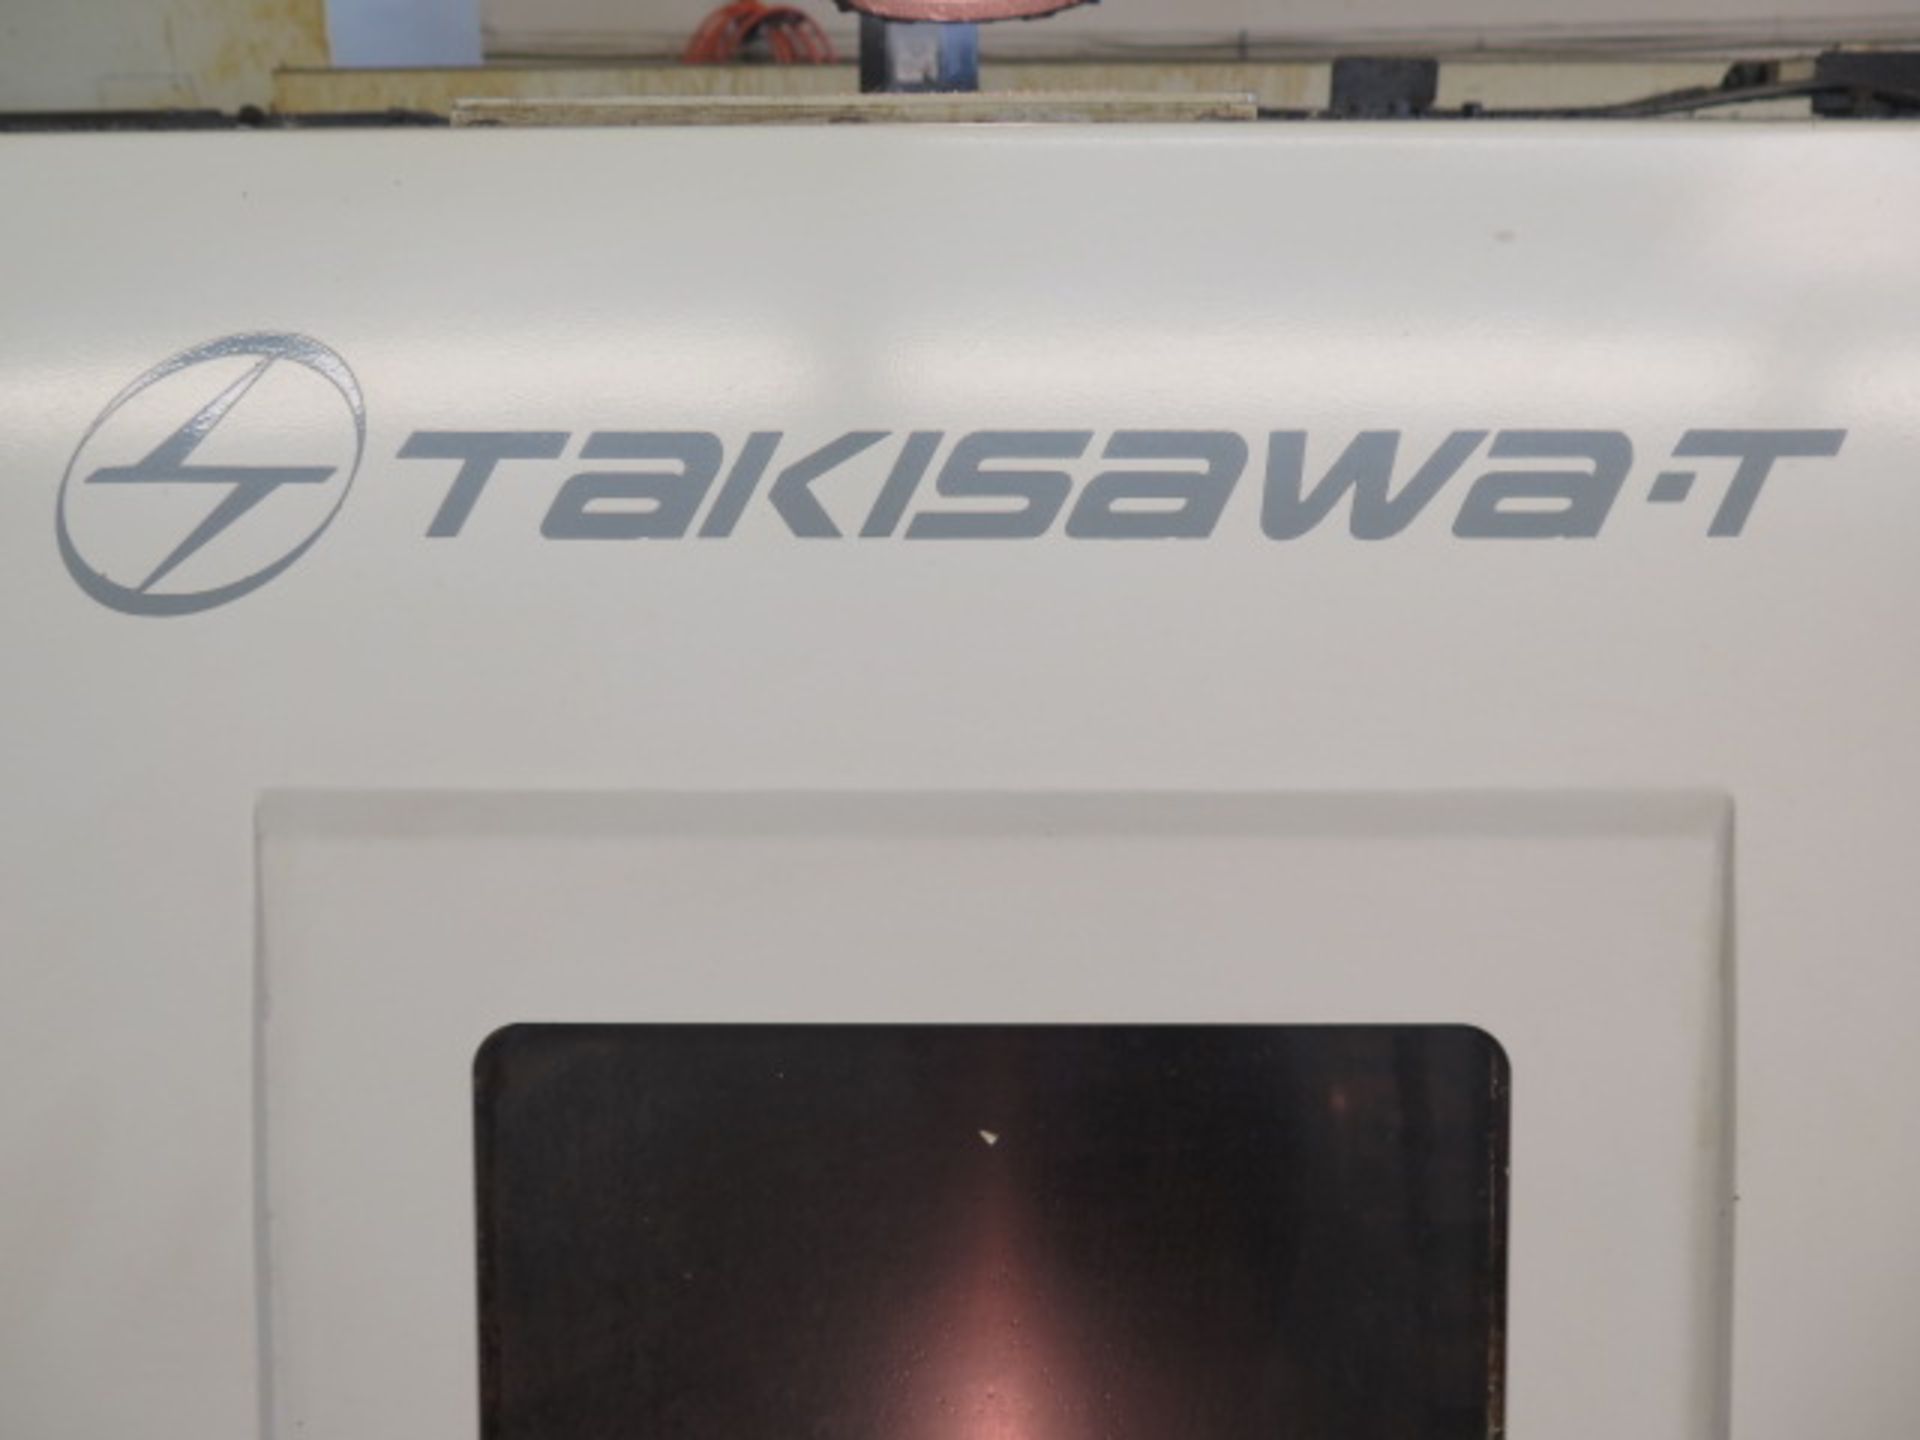 Takisawa-T EX-310 Live Turret CNC Turning Center s/n CW07E40035 w/ Fanuc Series 21i-TB, (SOLD AS IS) - Image 20 of 20